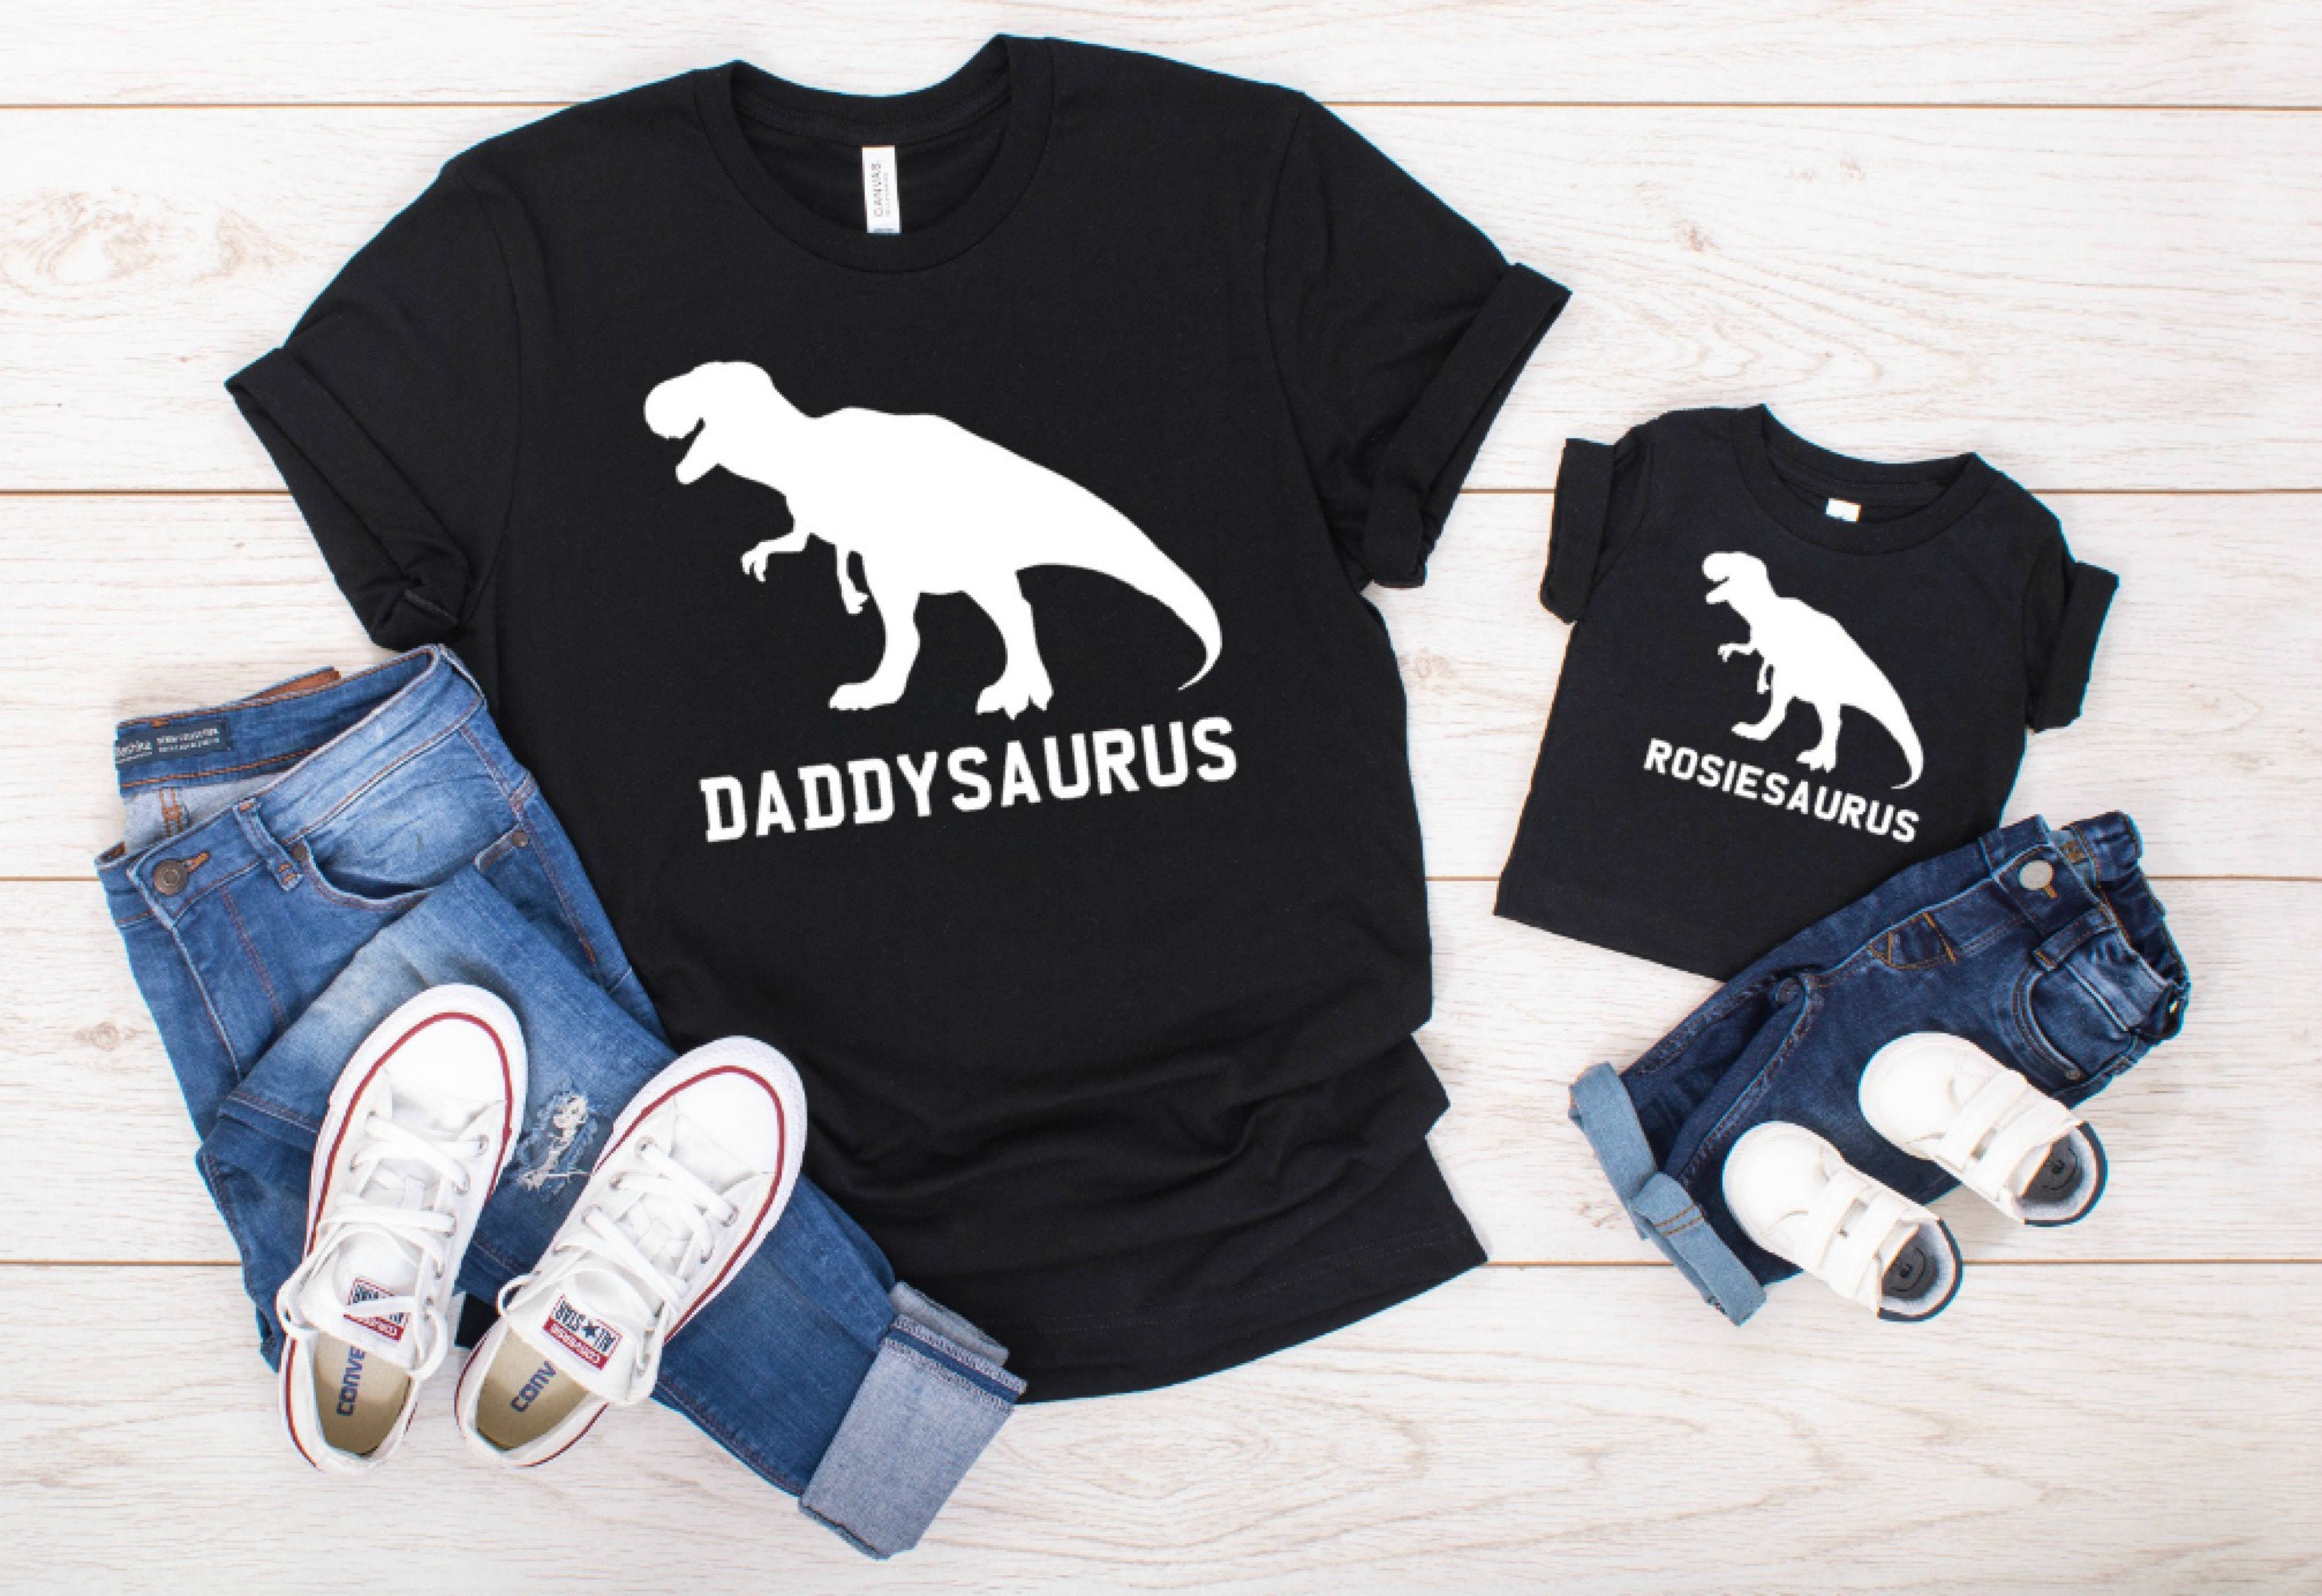 Daddy & Child Matching T-Shirt Set, Dinosaur Daddysaurus Namesaurus, Father & Son Or Daughter Father’s Day Gift